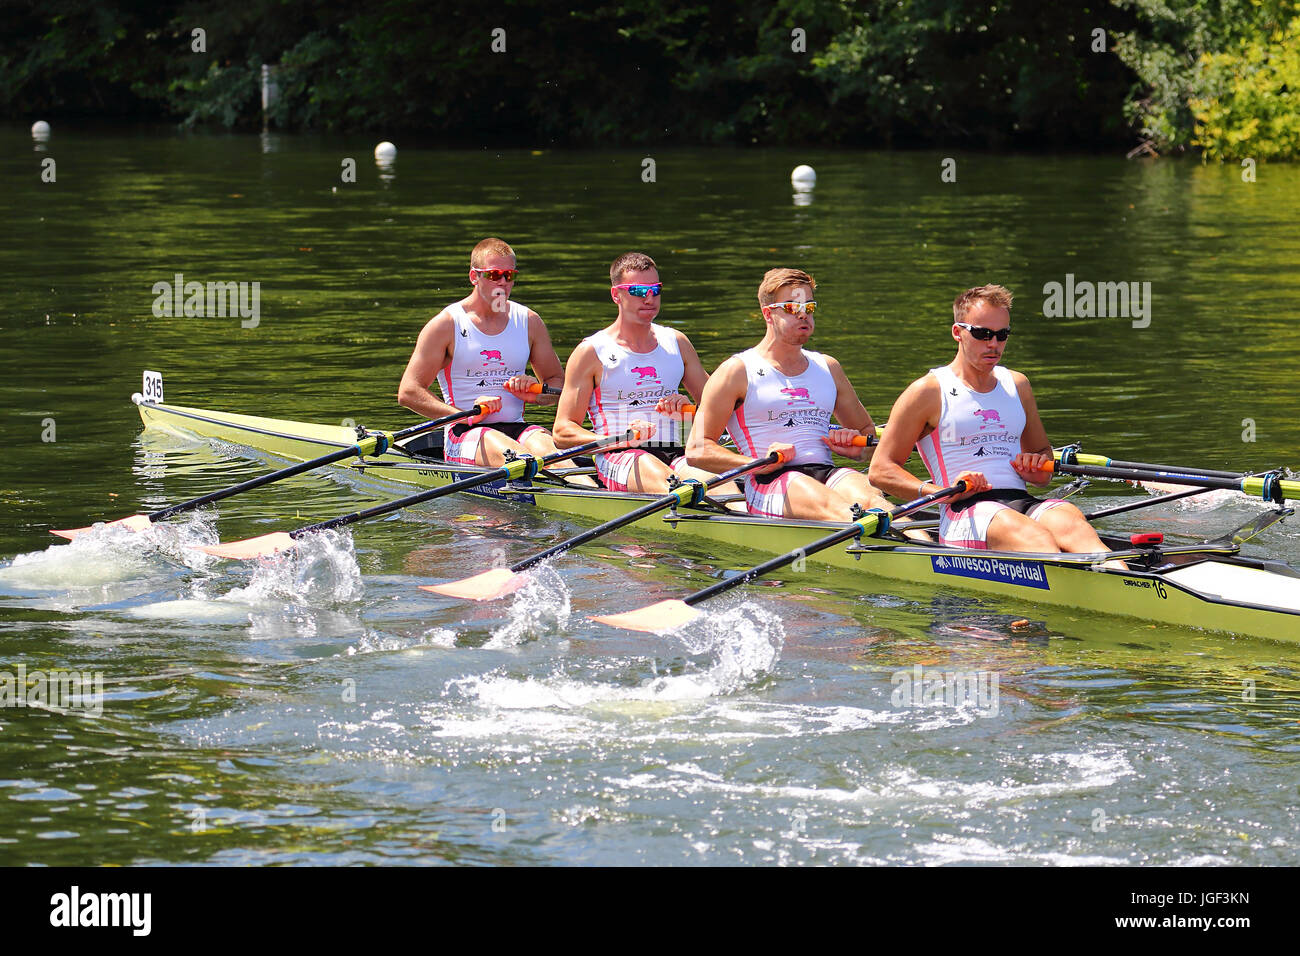 The Leander Club A and B coxless four set off on the final day of Henley Royal Regatta 2017 in the Prince of Wales Challenge Cup. Leander Club A won. Stock Photo